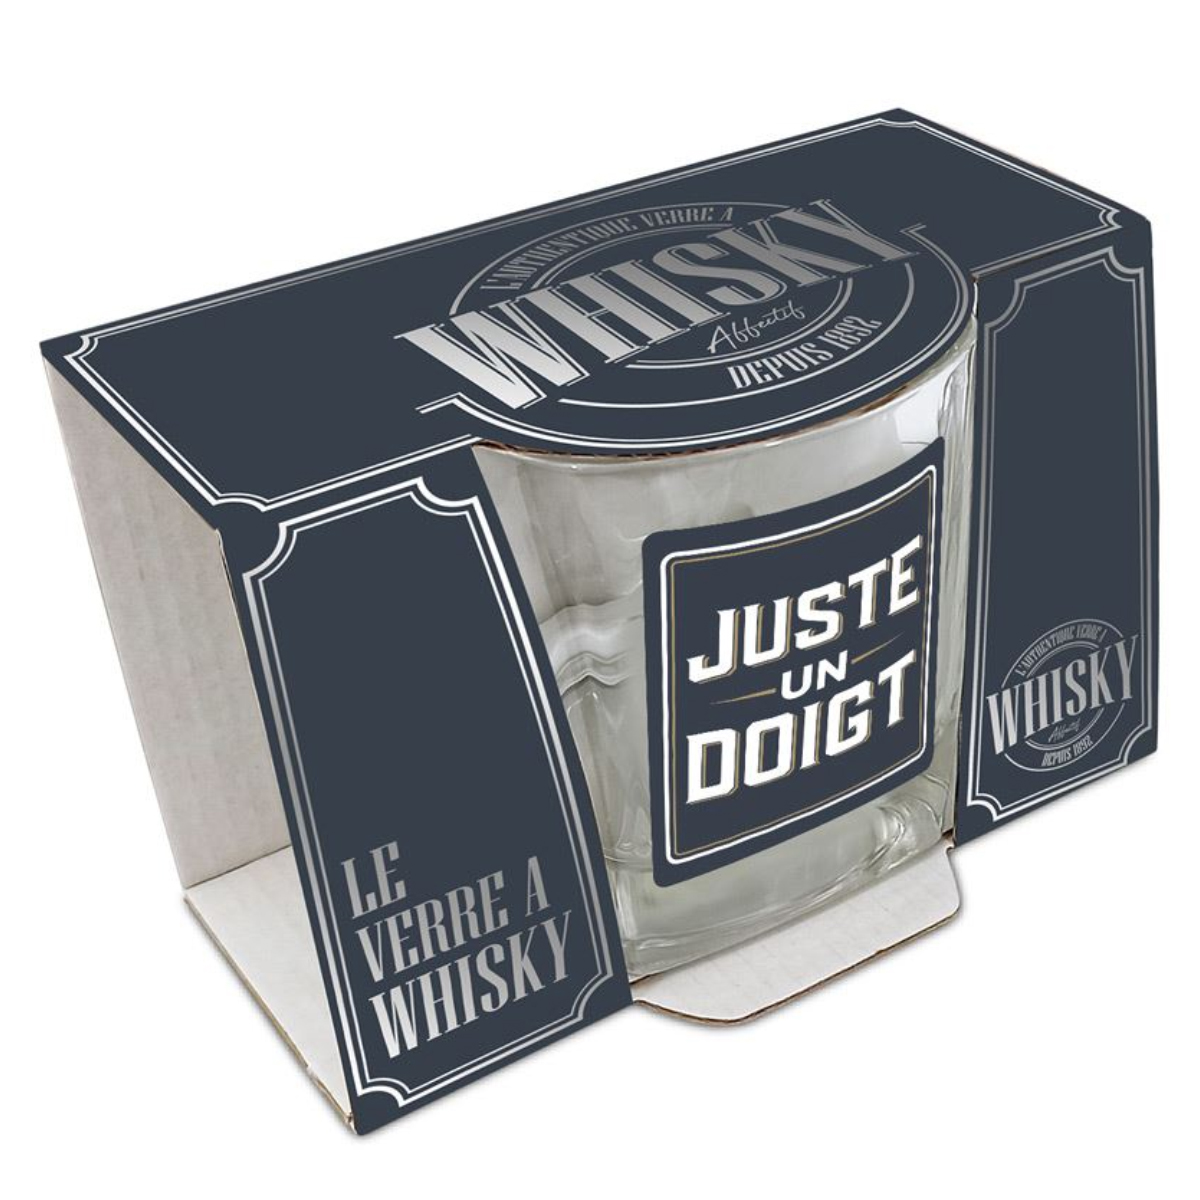 Whiskey glass - juste un doigt